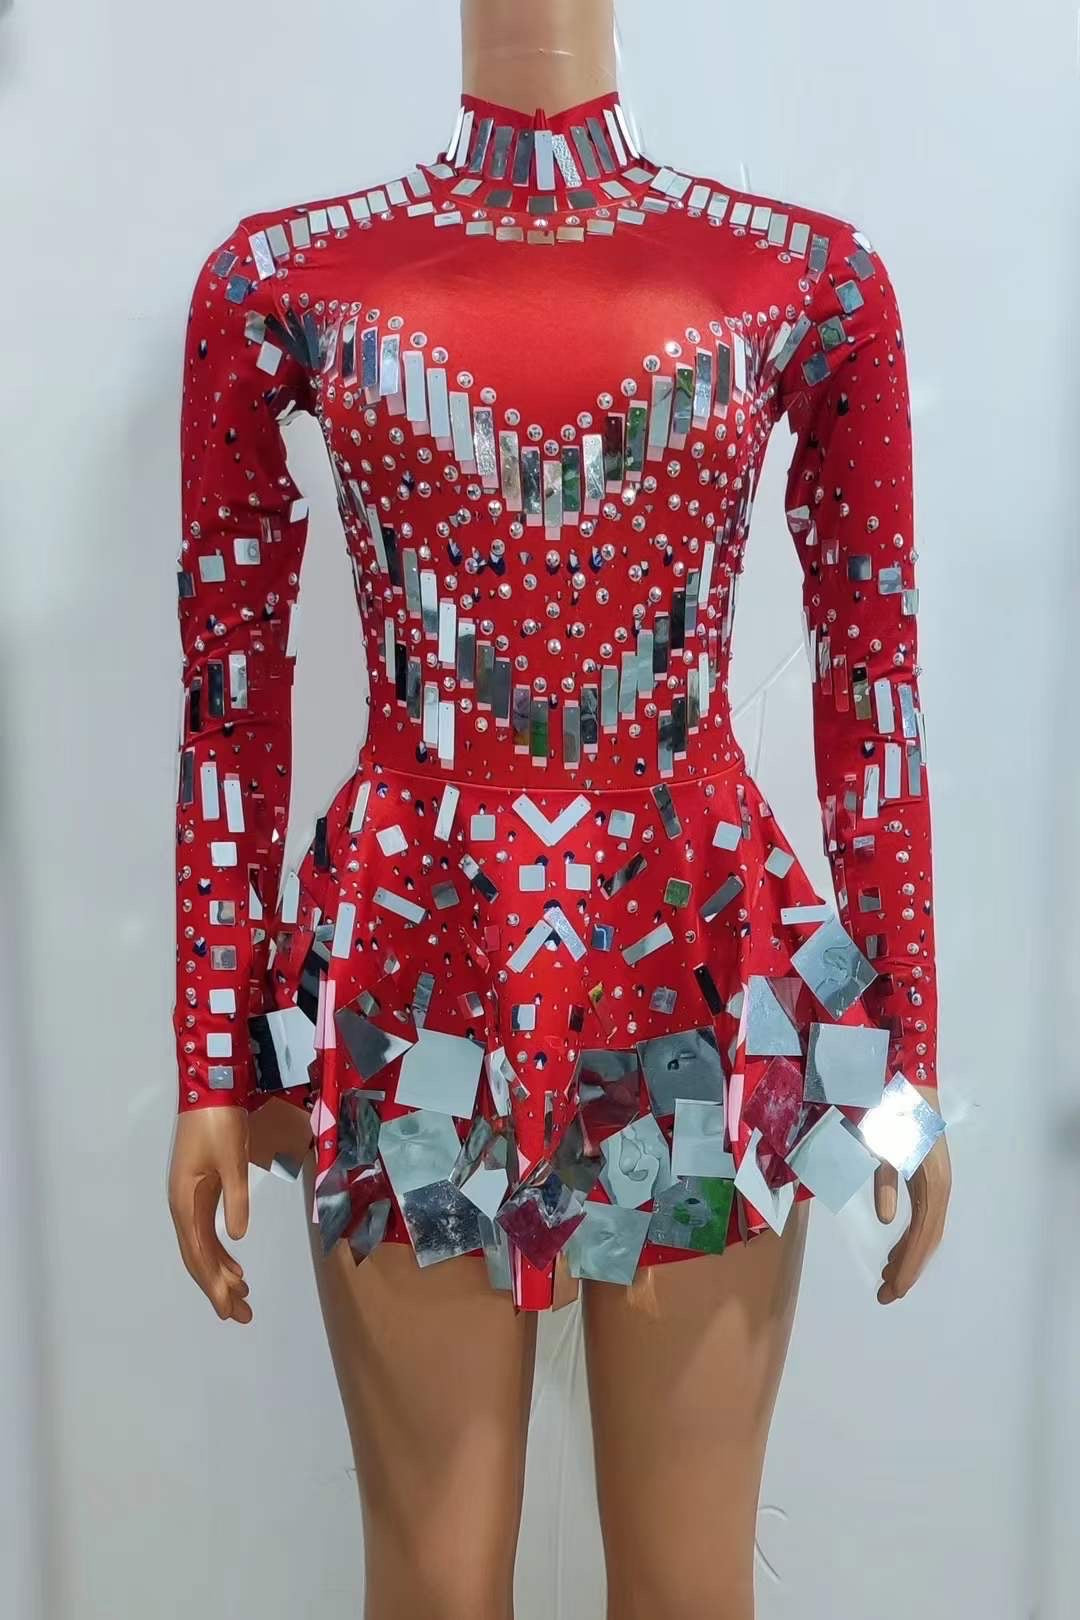 Disco Red and Silver remix dress